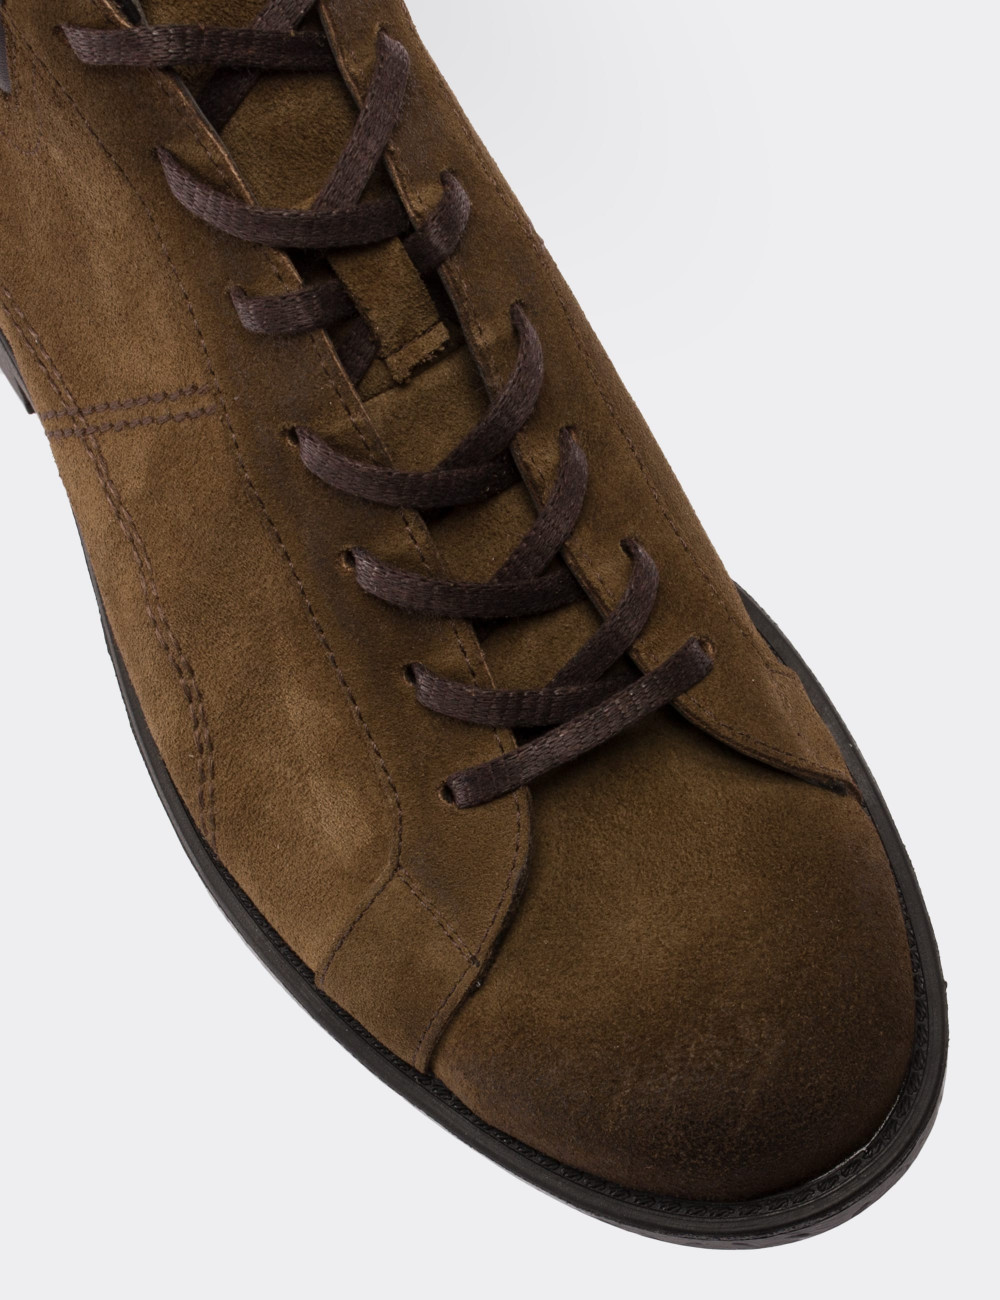 Green Suede Leather Boots - 01760MYSLC02